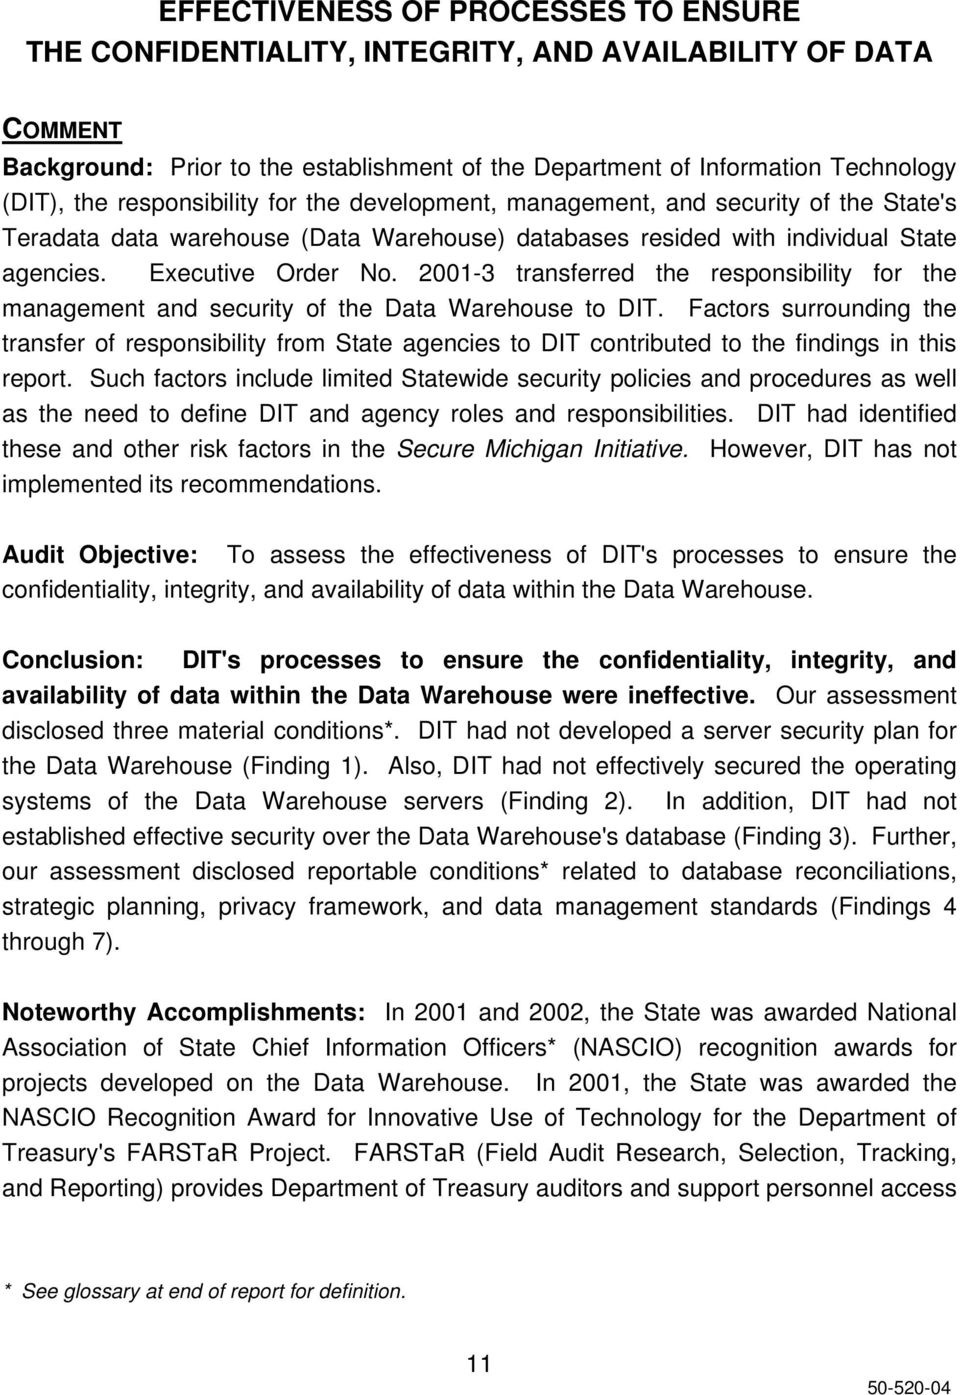 2001-3 transferred the responsibility for the management and security of the Data Warehouse to DIT.